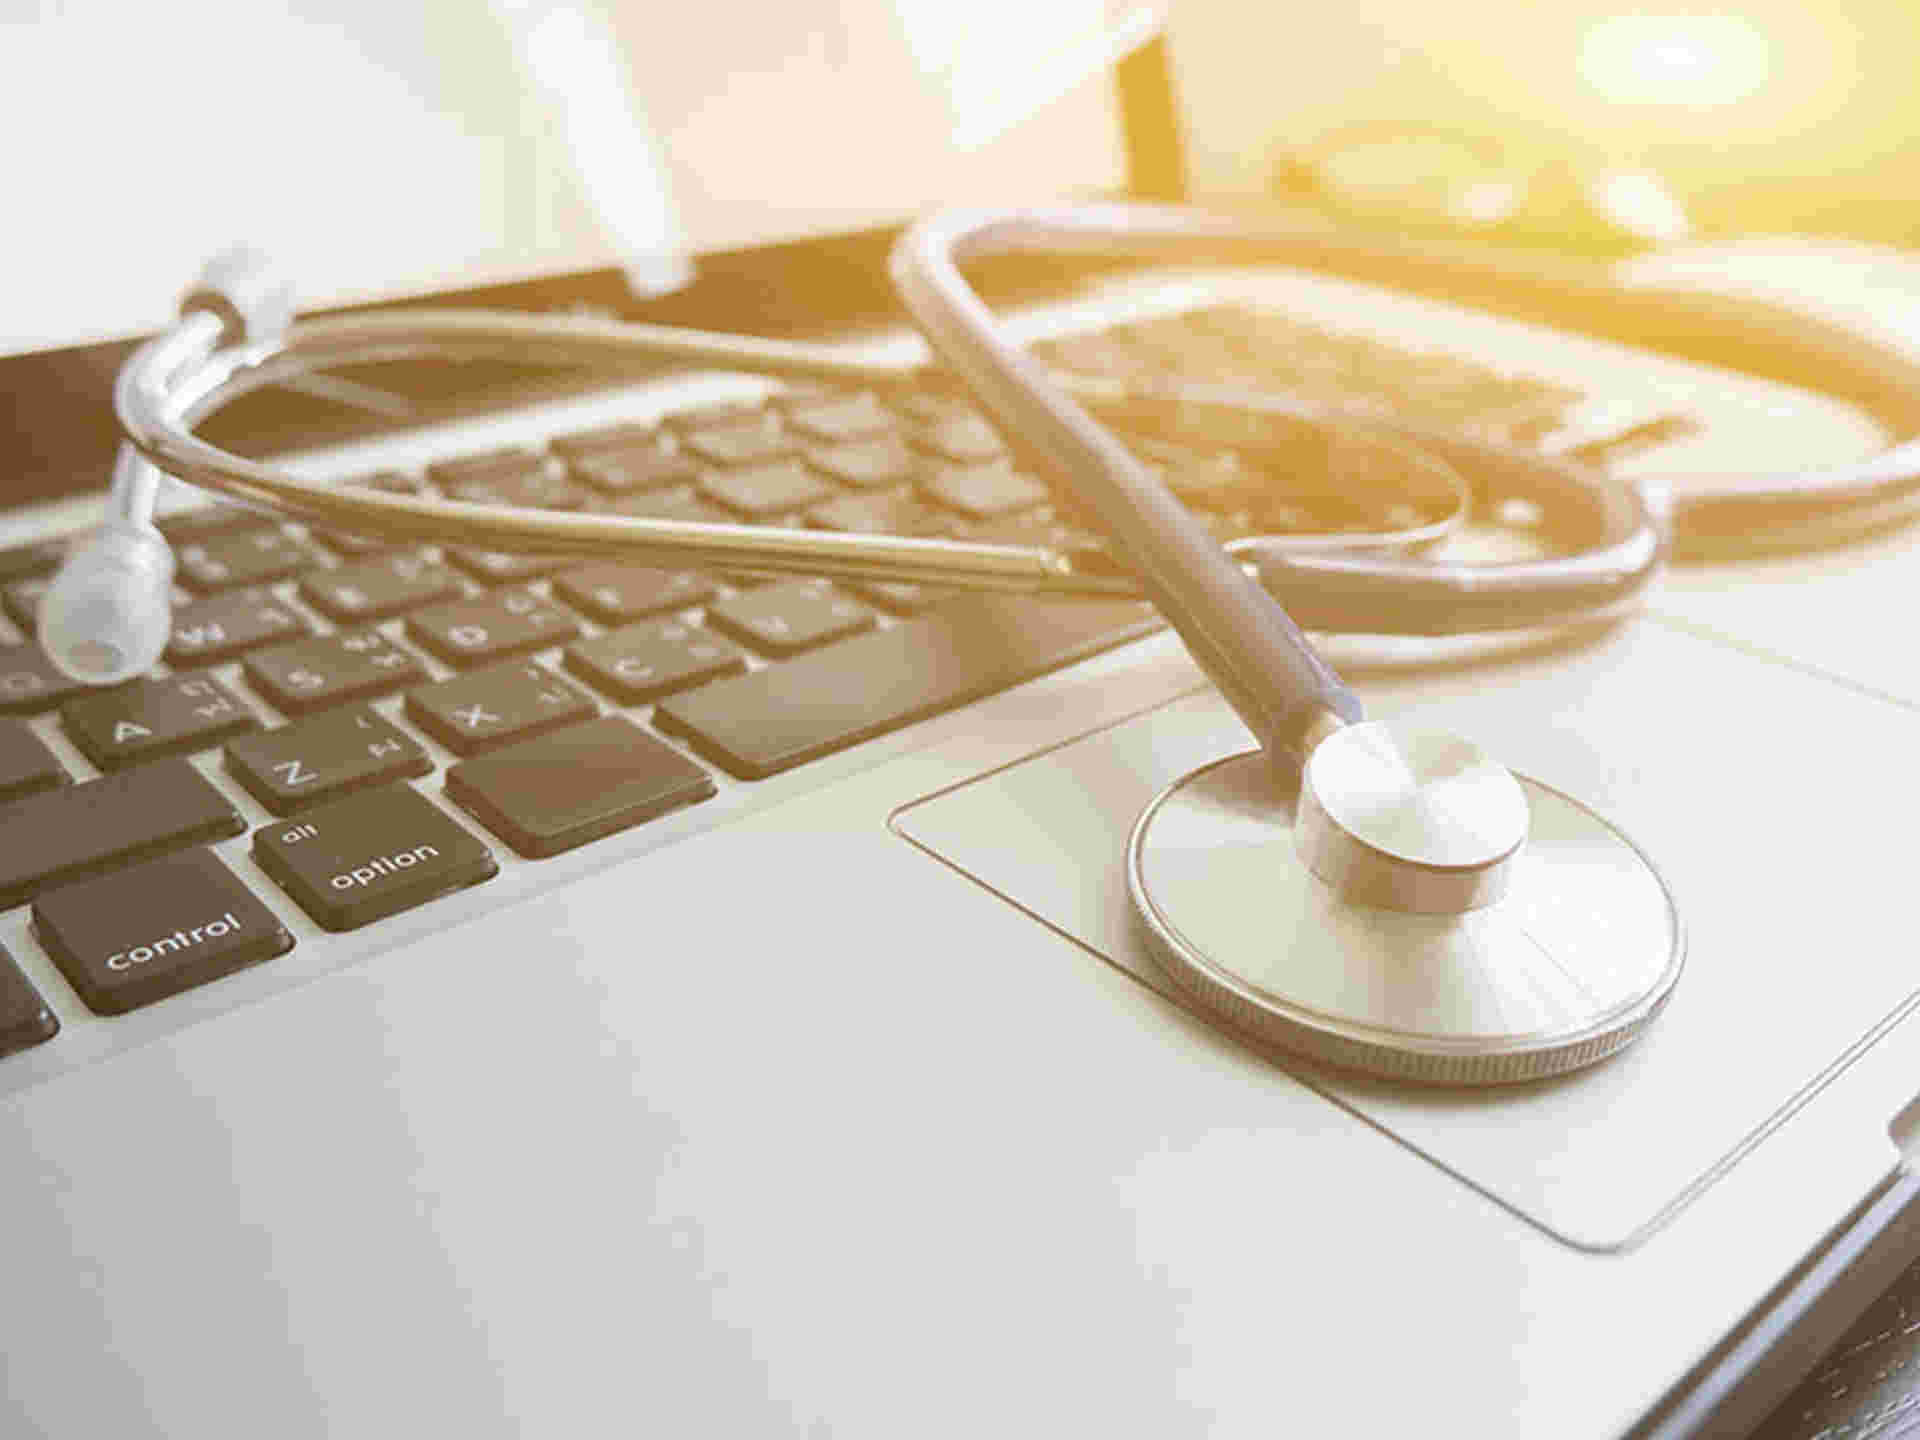 UK healthcare organisations are missing out on the Cloud